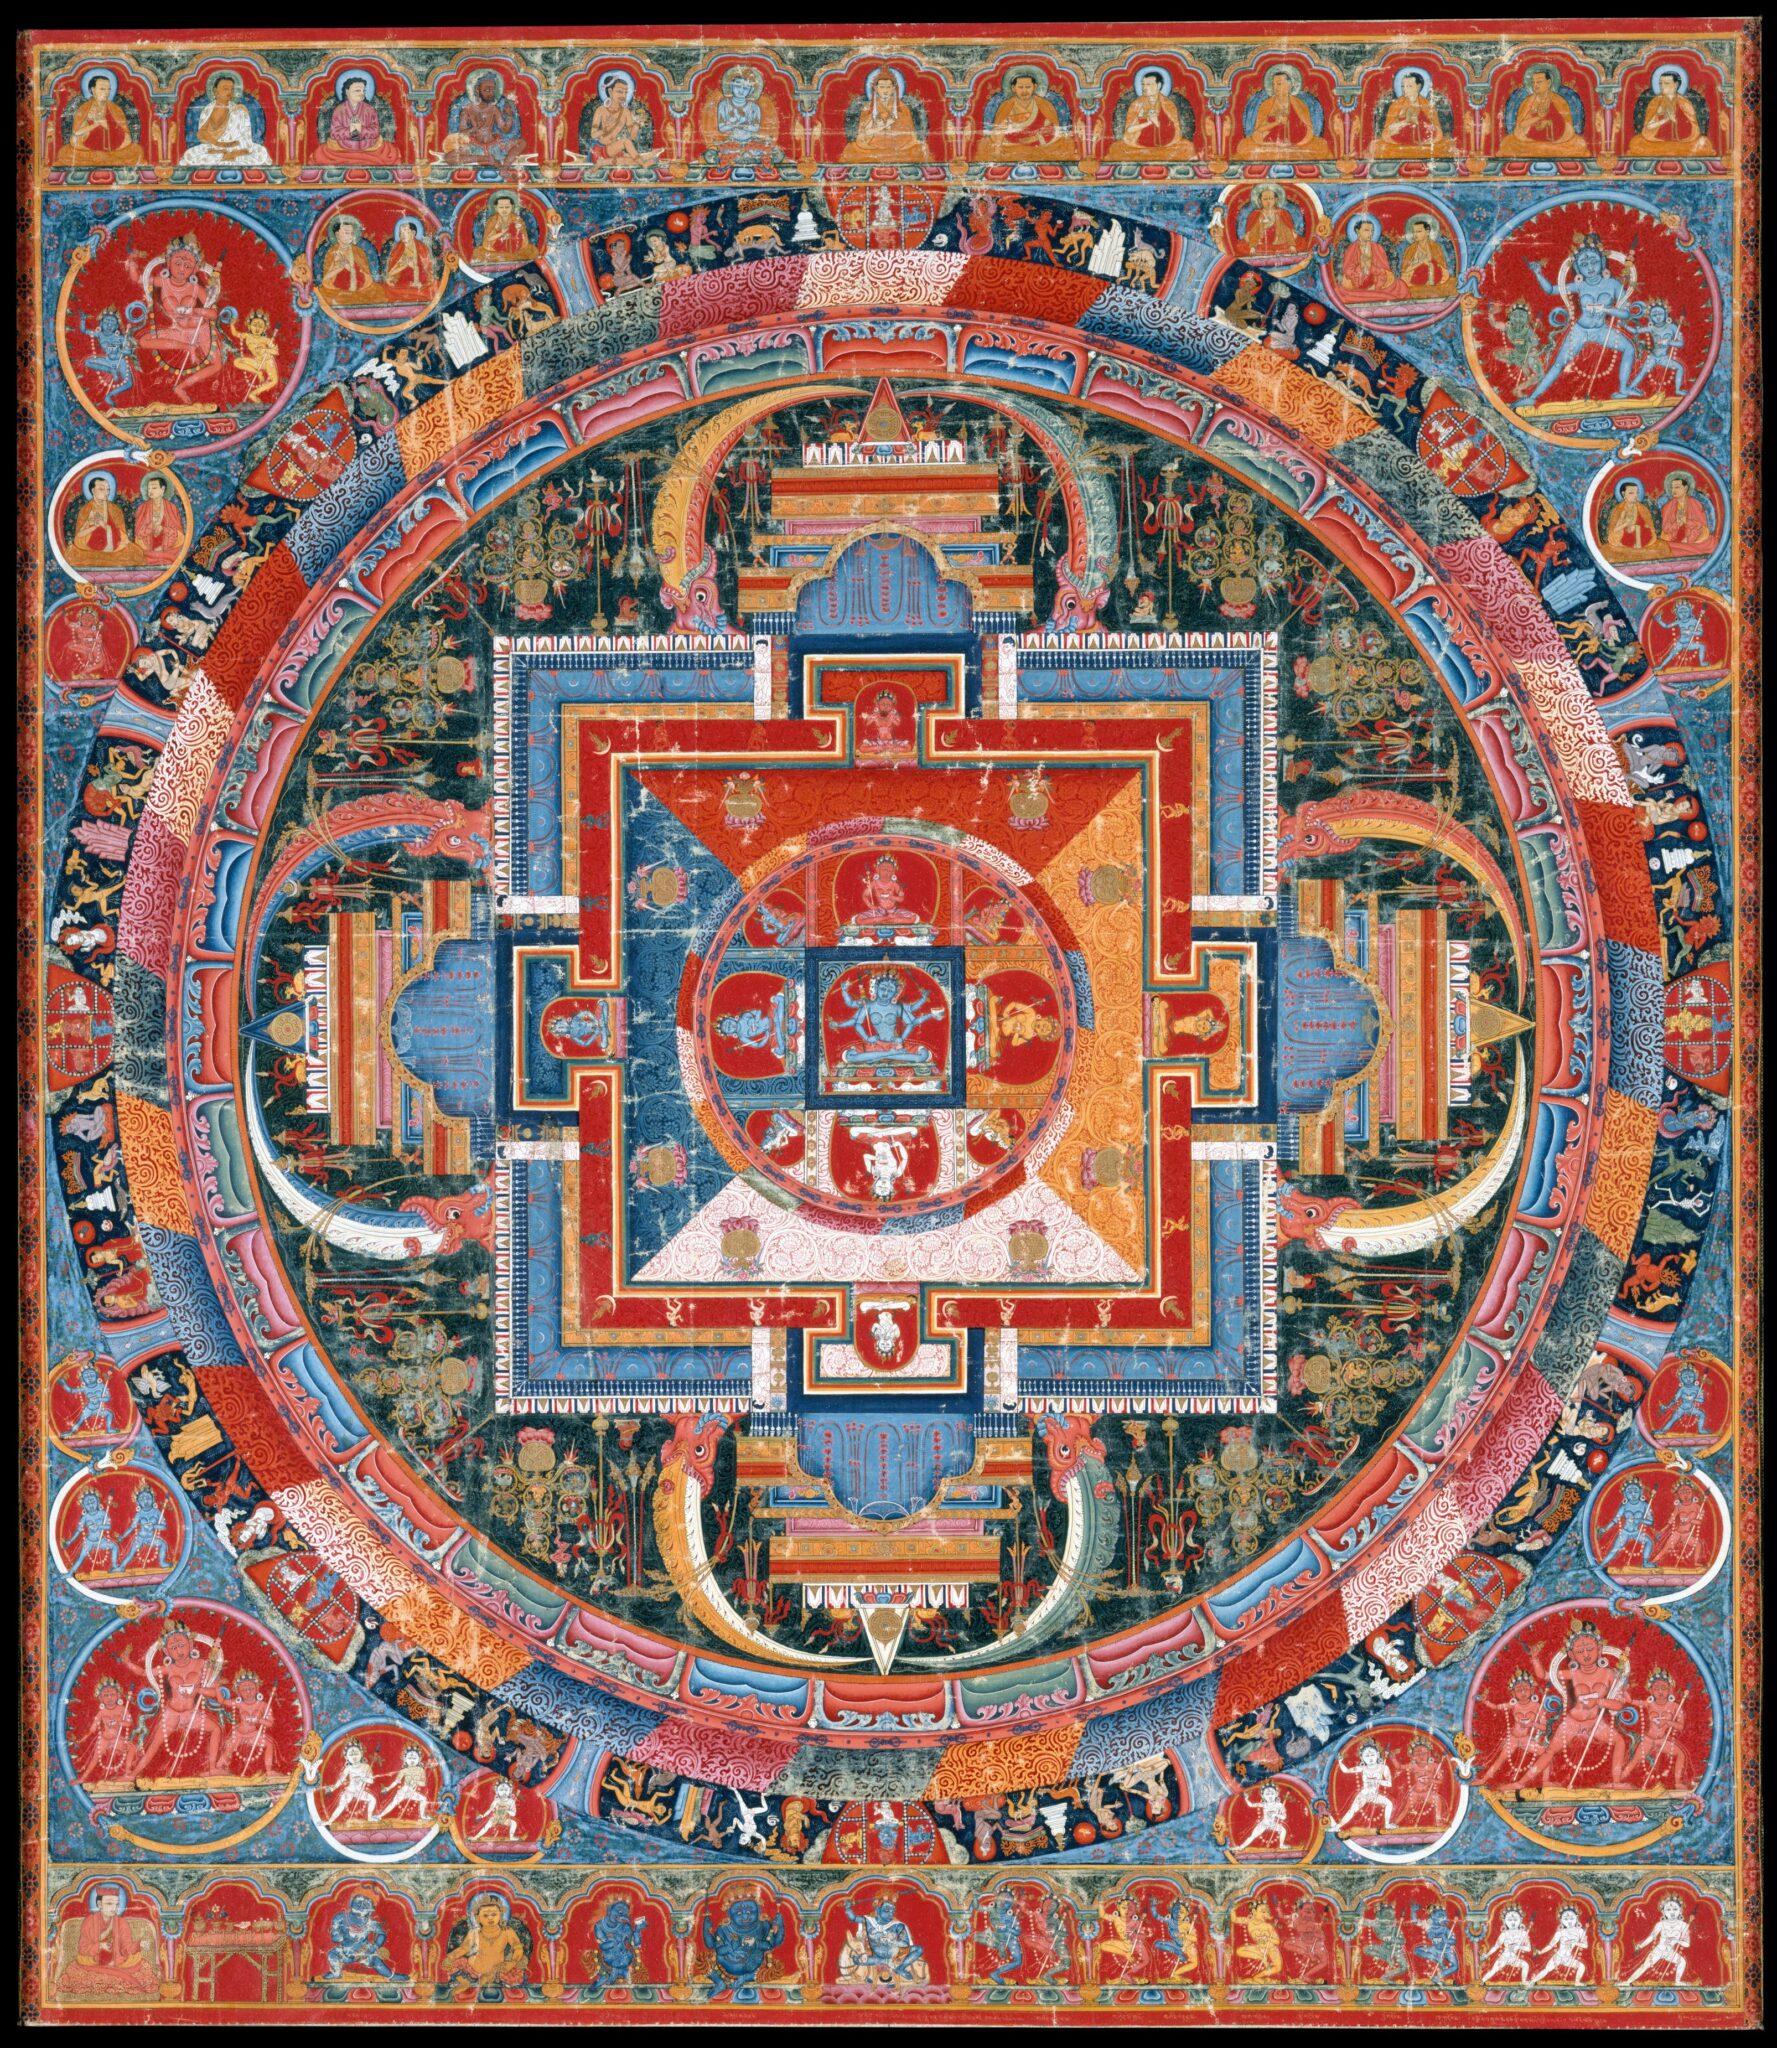 Profusely decorated, brightly colored mandala featuring portraits in roundels and in arches at top and bottom